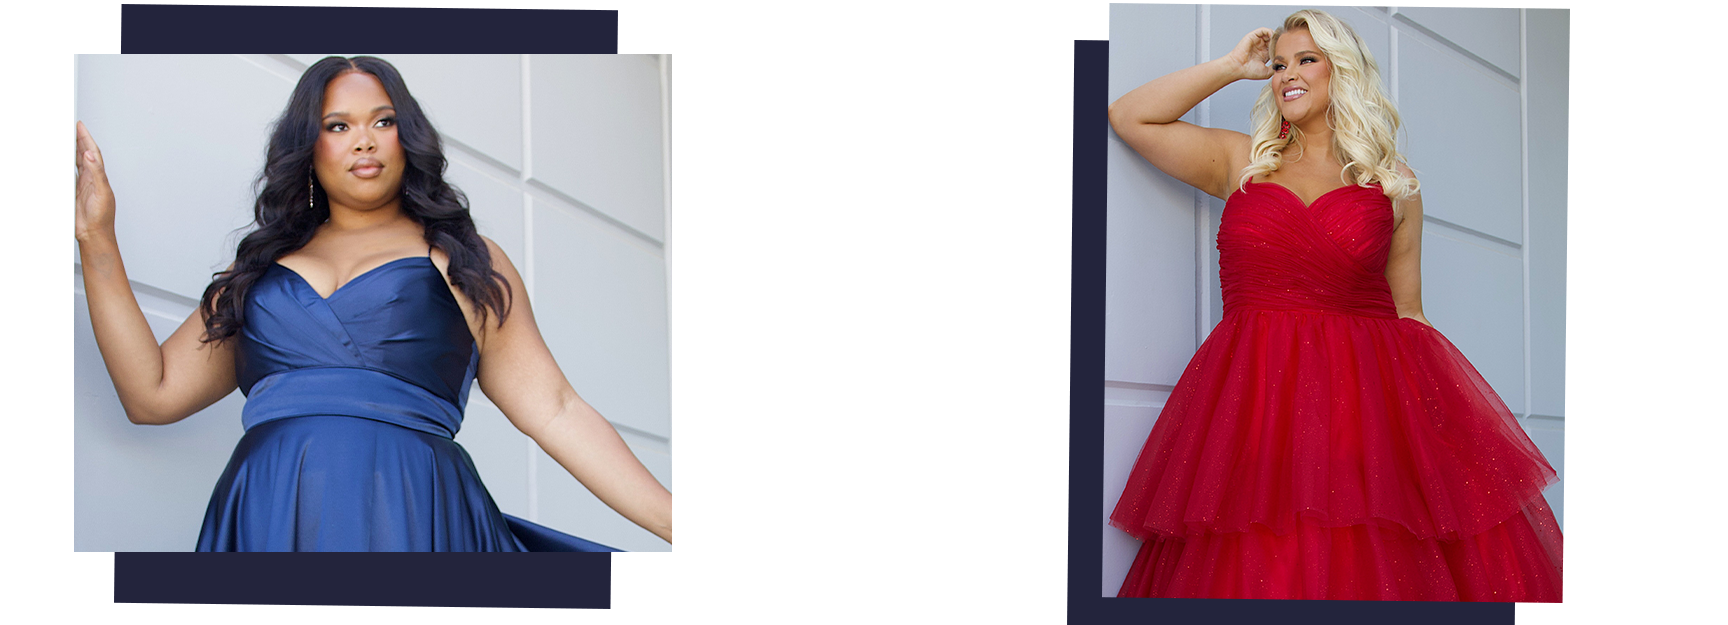 Sydney's Closet Plus Size Collection of Blue and Red Prom and Evening Dresses